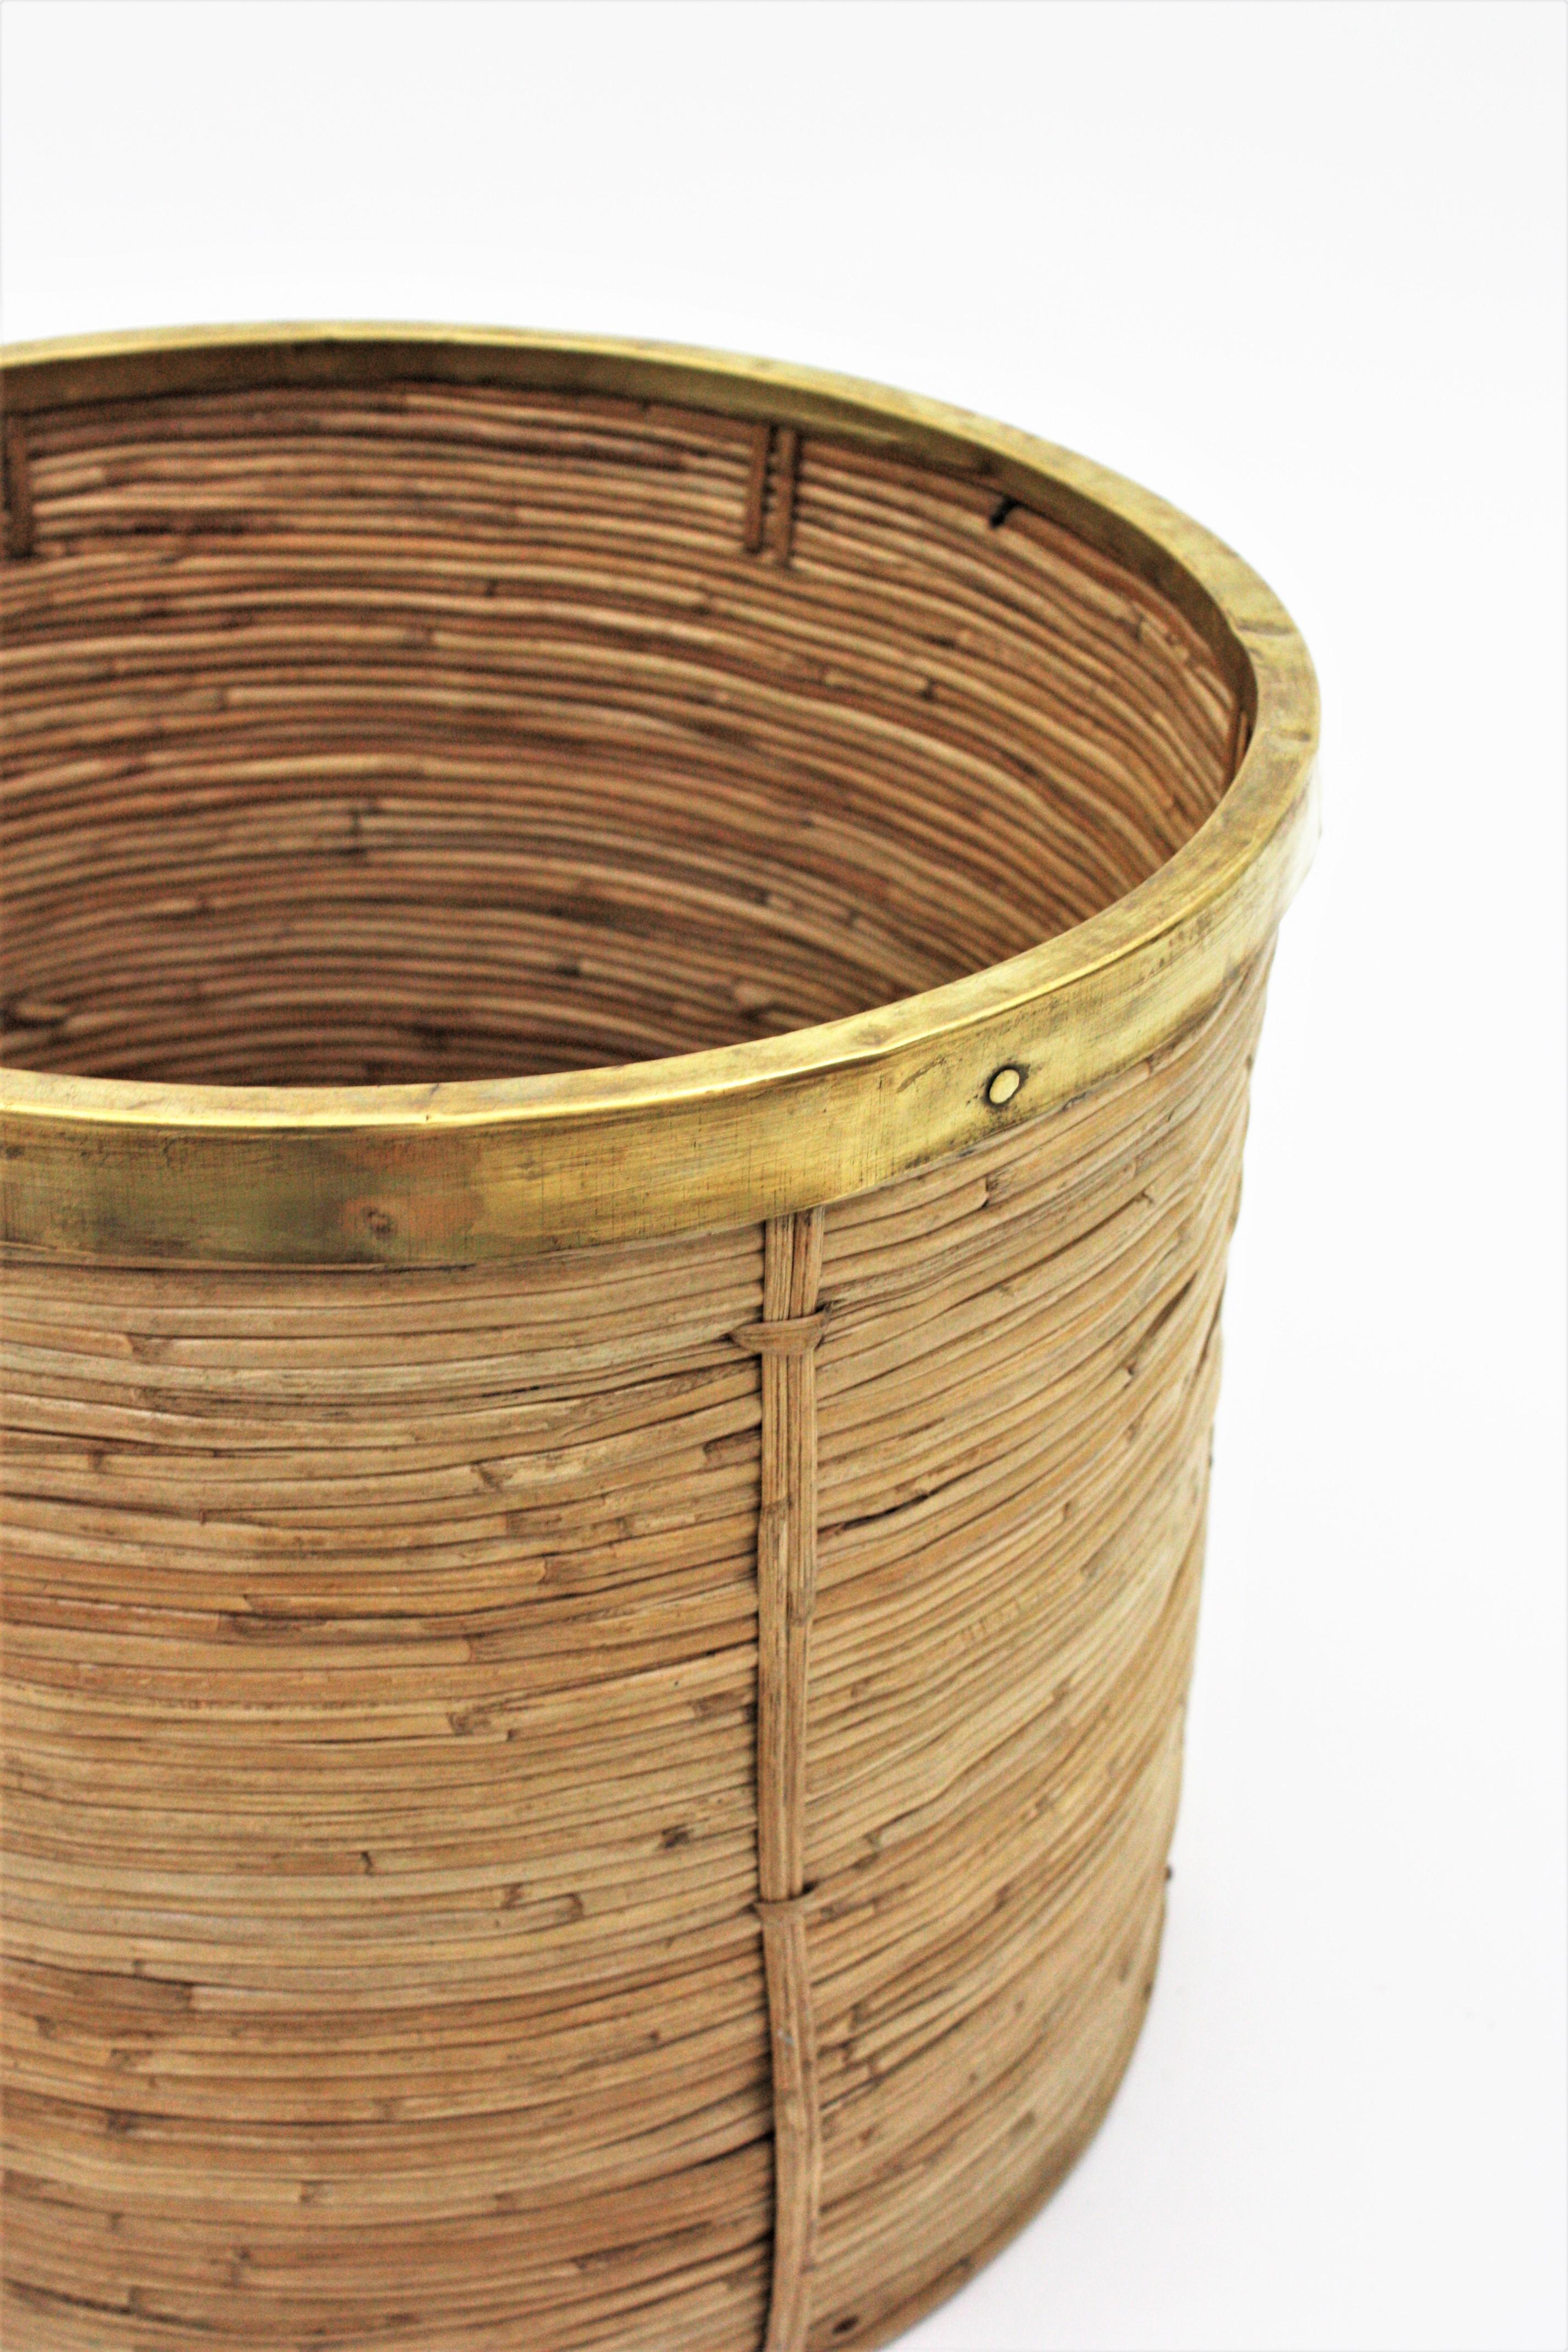 Large Rattan Bamboo Round Planter with Brass Rim, Italy, 1970s For Sale 1